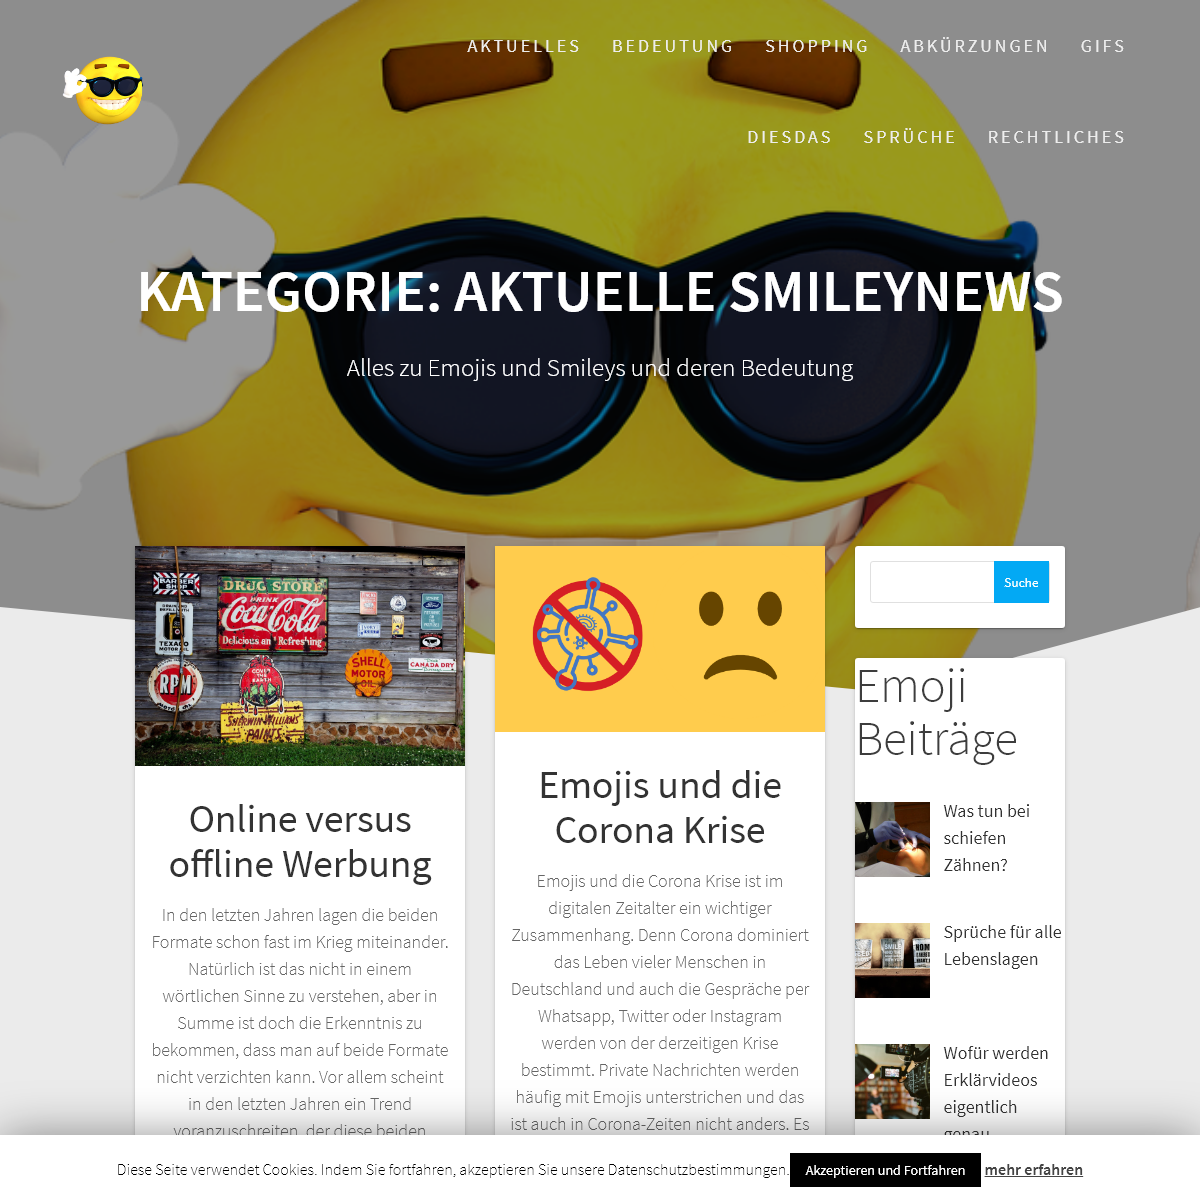 A complete backup of smileyparadies.de